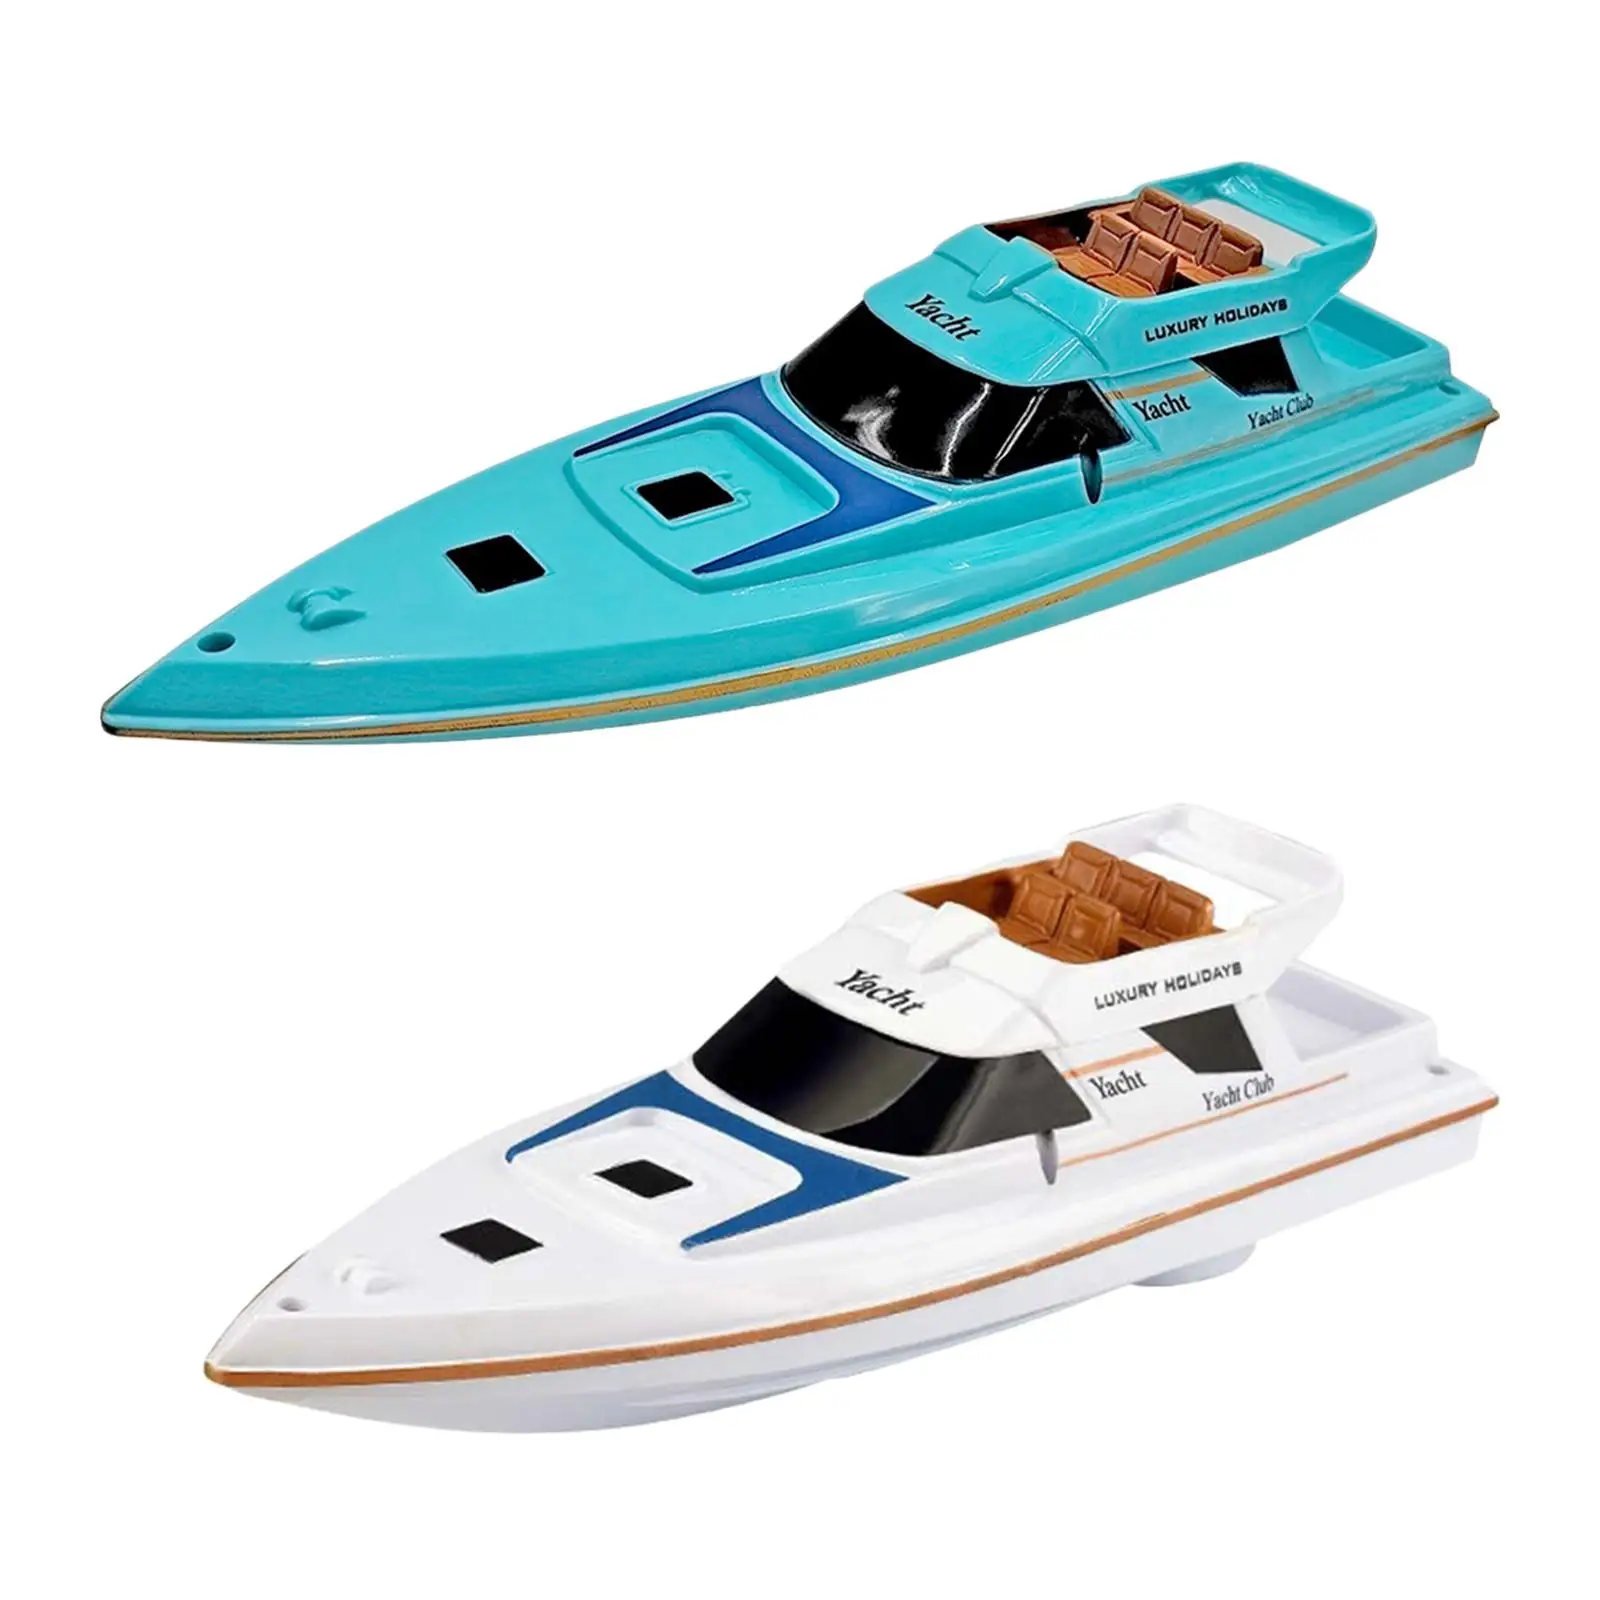 Electric Speed Boat Floating Toy Bath Boat Bathtub Bath Kid Motor Boat Airship for Game Favor Gift Ponds Swimming Pool